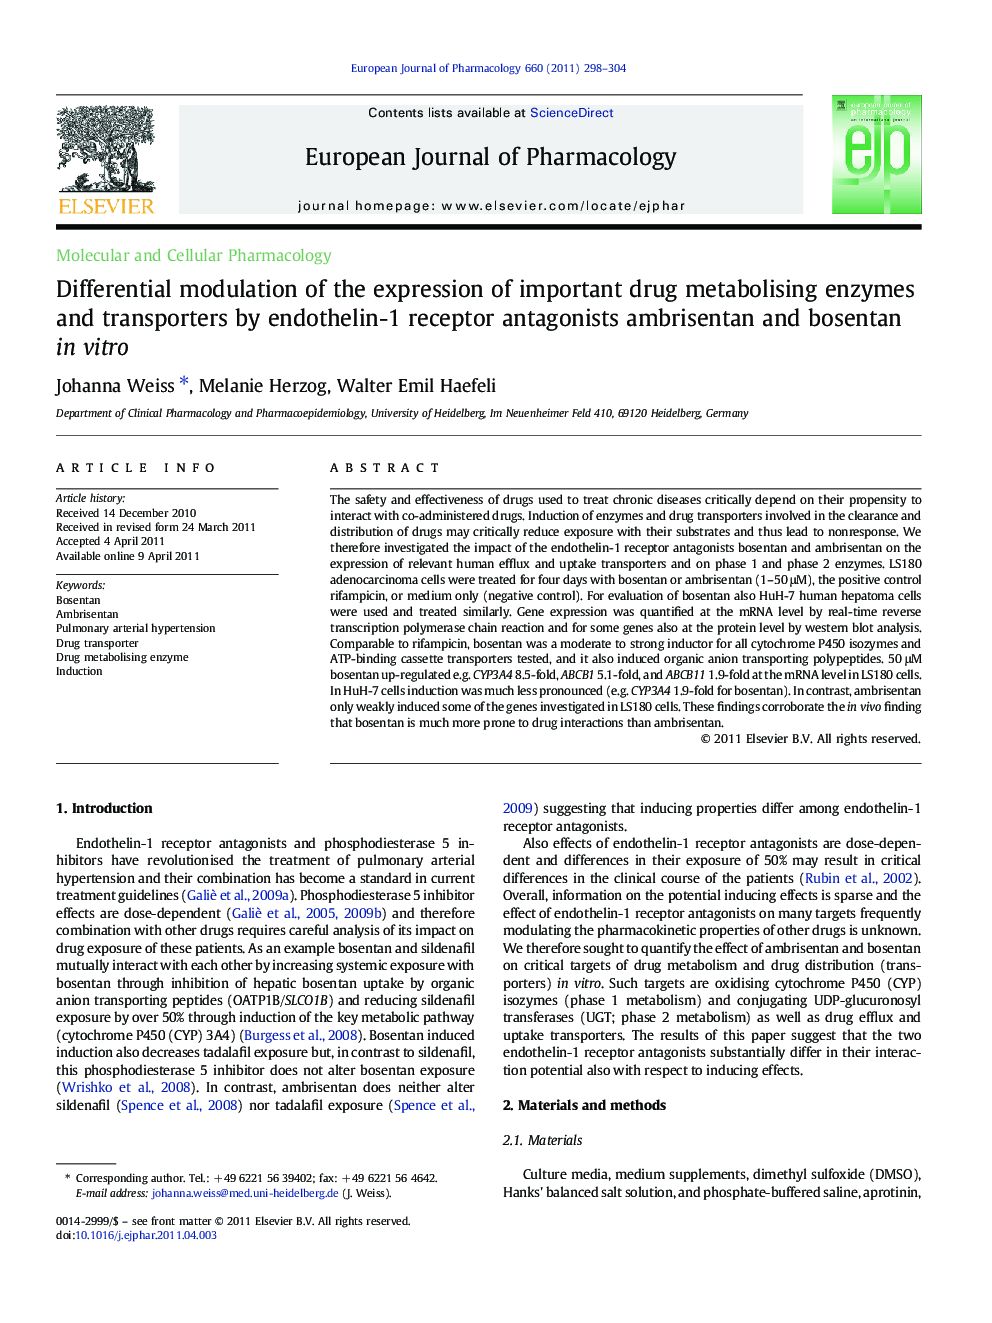 Molecular and Cellular PharmacologyDifferential modulation of the expression of important drug metabolising enzymes and transporters by endothelin-1 receptor antagonists ambrisentan and bosentan in vitro